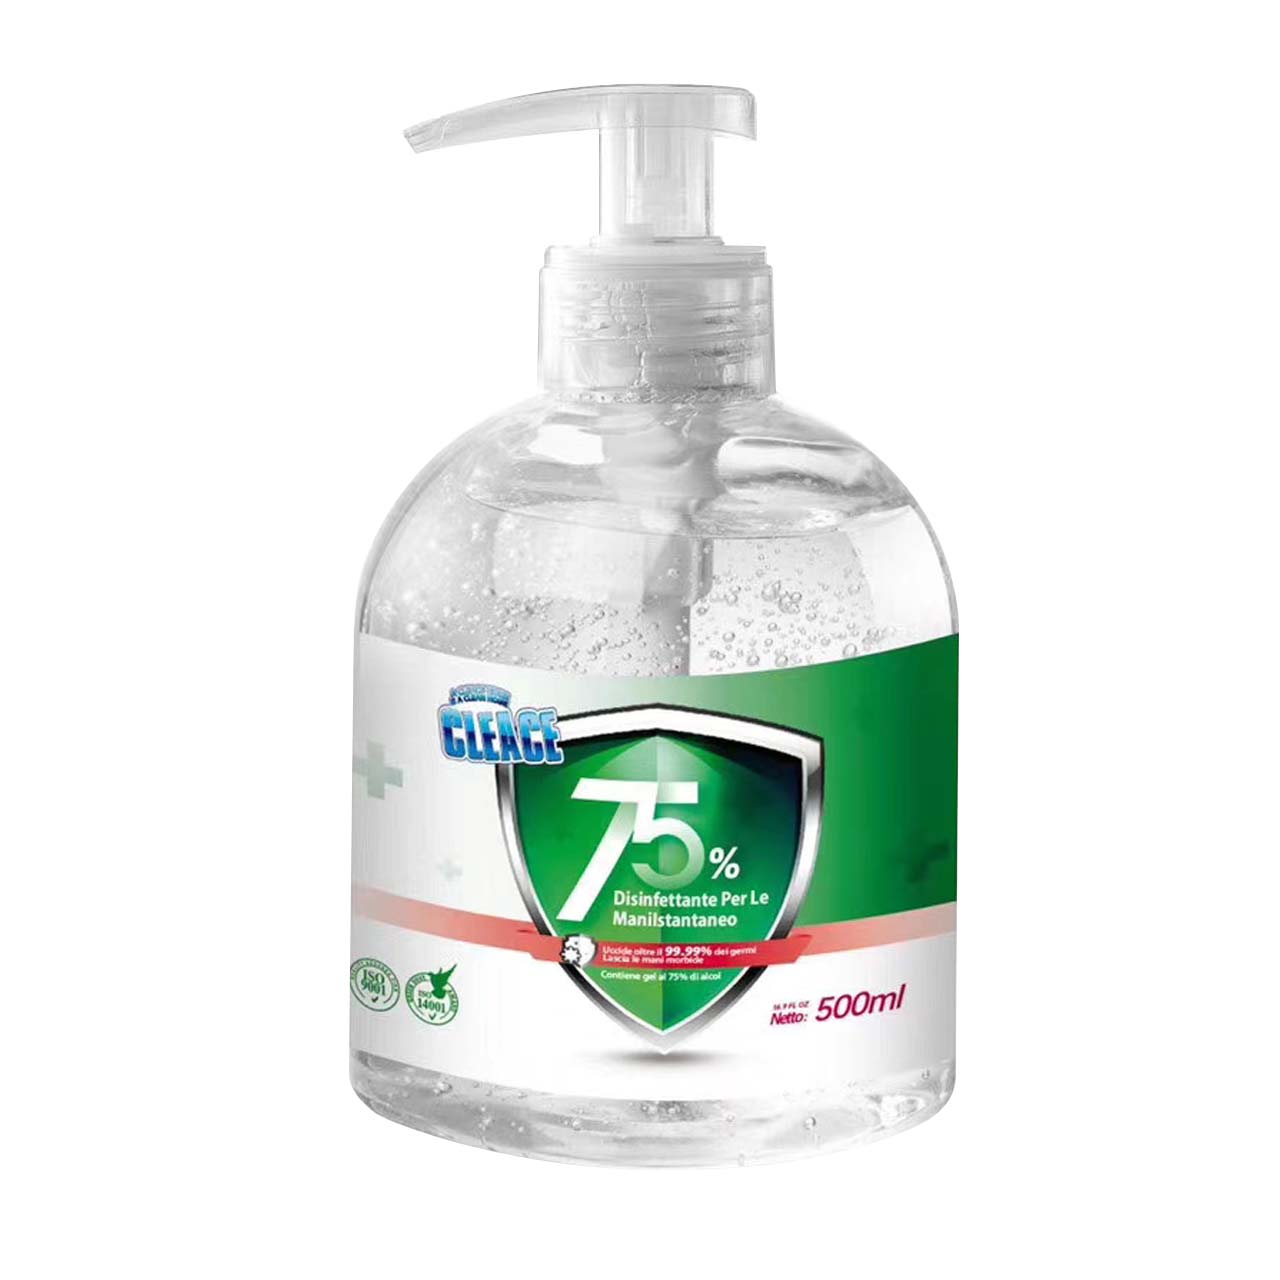 Cleace-Alcohol-Hand-Sanitizer-750ml-front-2